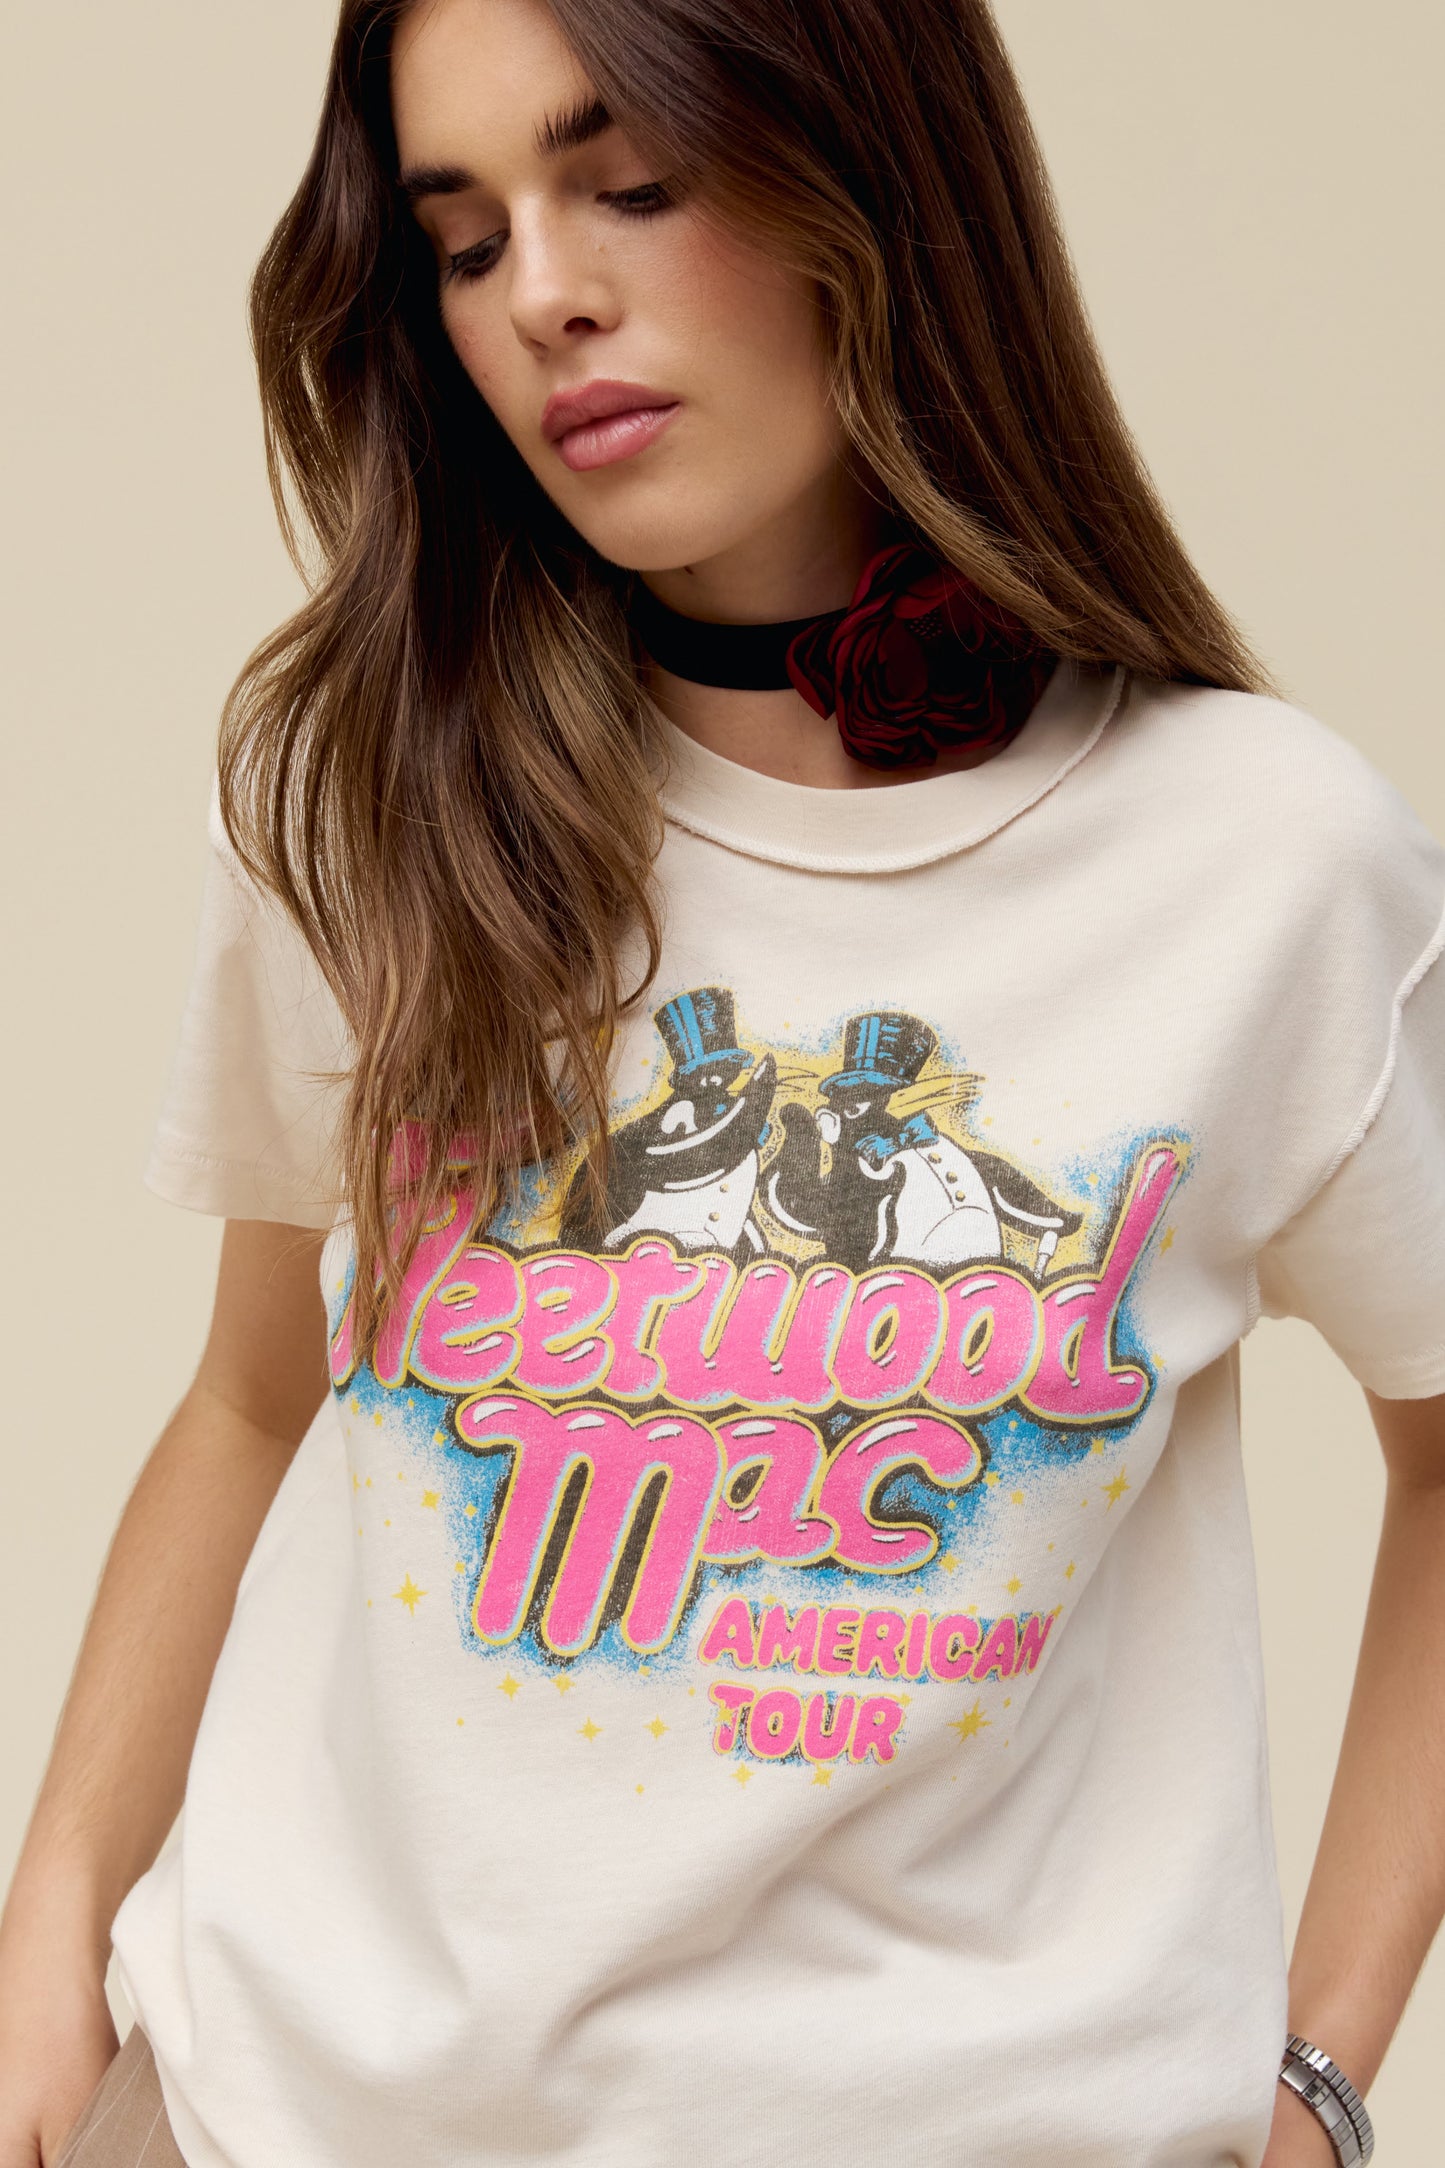 A model featuring a dirty white Fleetwood Mac tour tee designed with with their group name and a penguin graphic; with a special shoutout to their American Tour featuring their city stops stamped on the back.